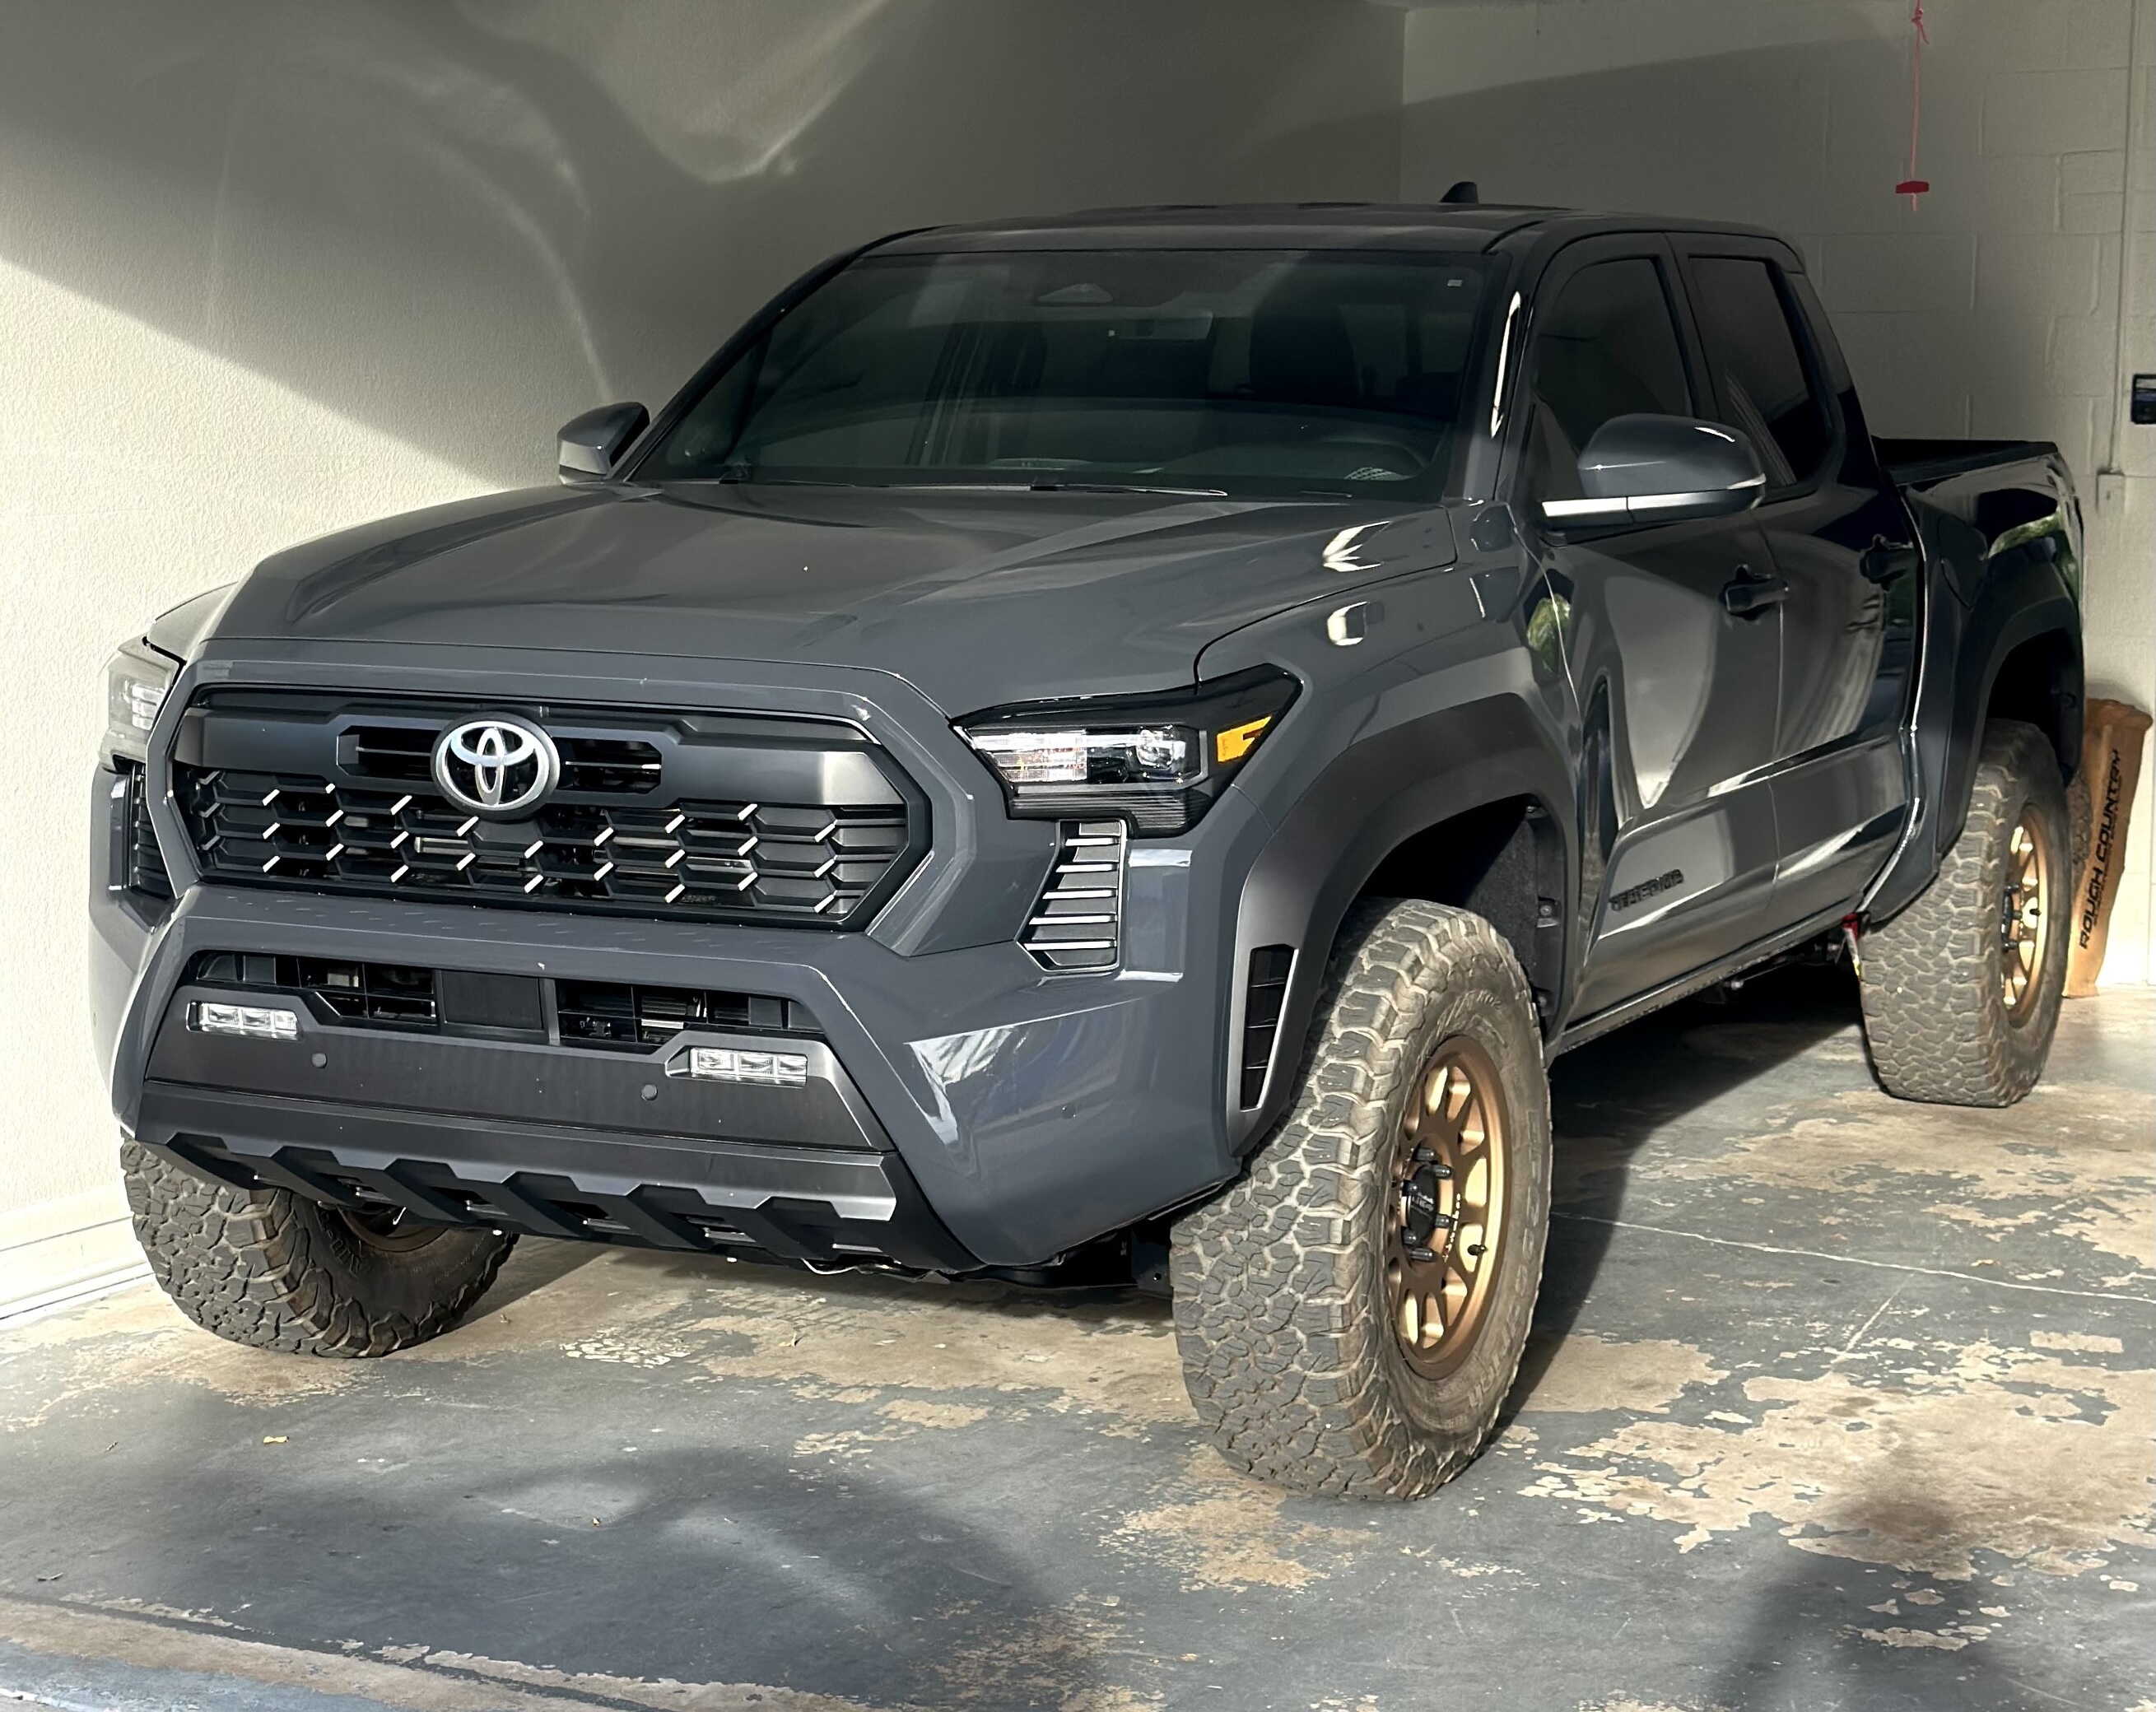 2024 Tacoma Official UNDERGROUND 2024 Tacoma Thread (4th Gen) 33's (285:70:17 tires) with 703 Method wheels (+35 offset) on factory suspension 2024 Tacoma T